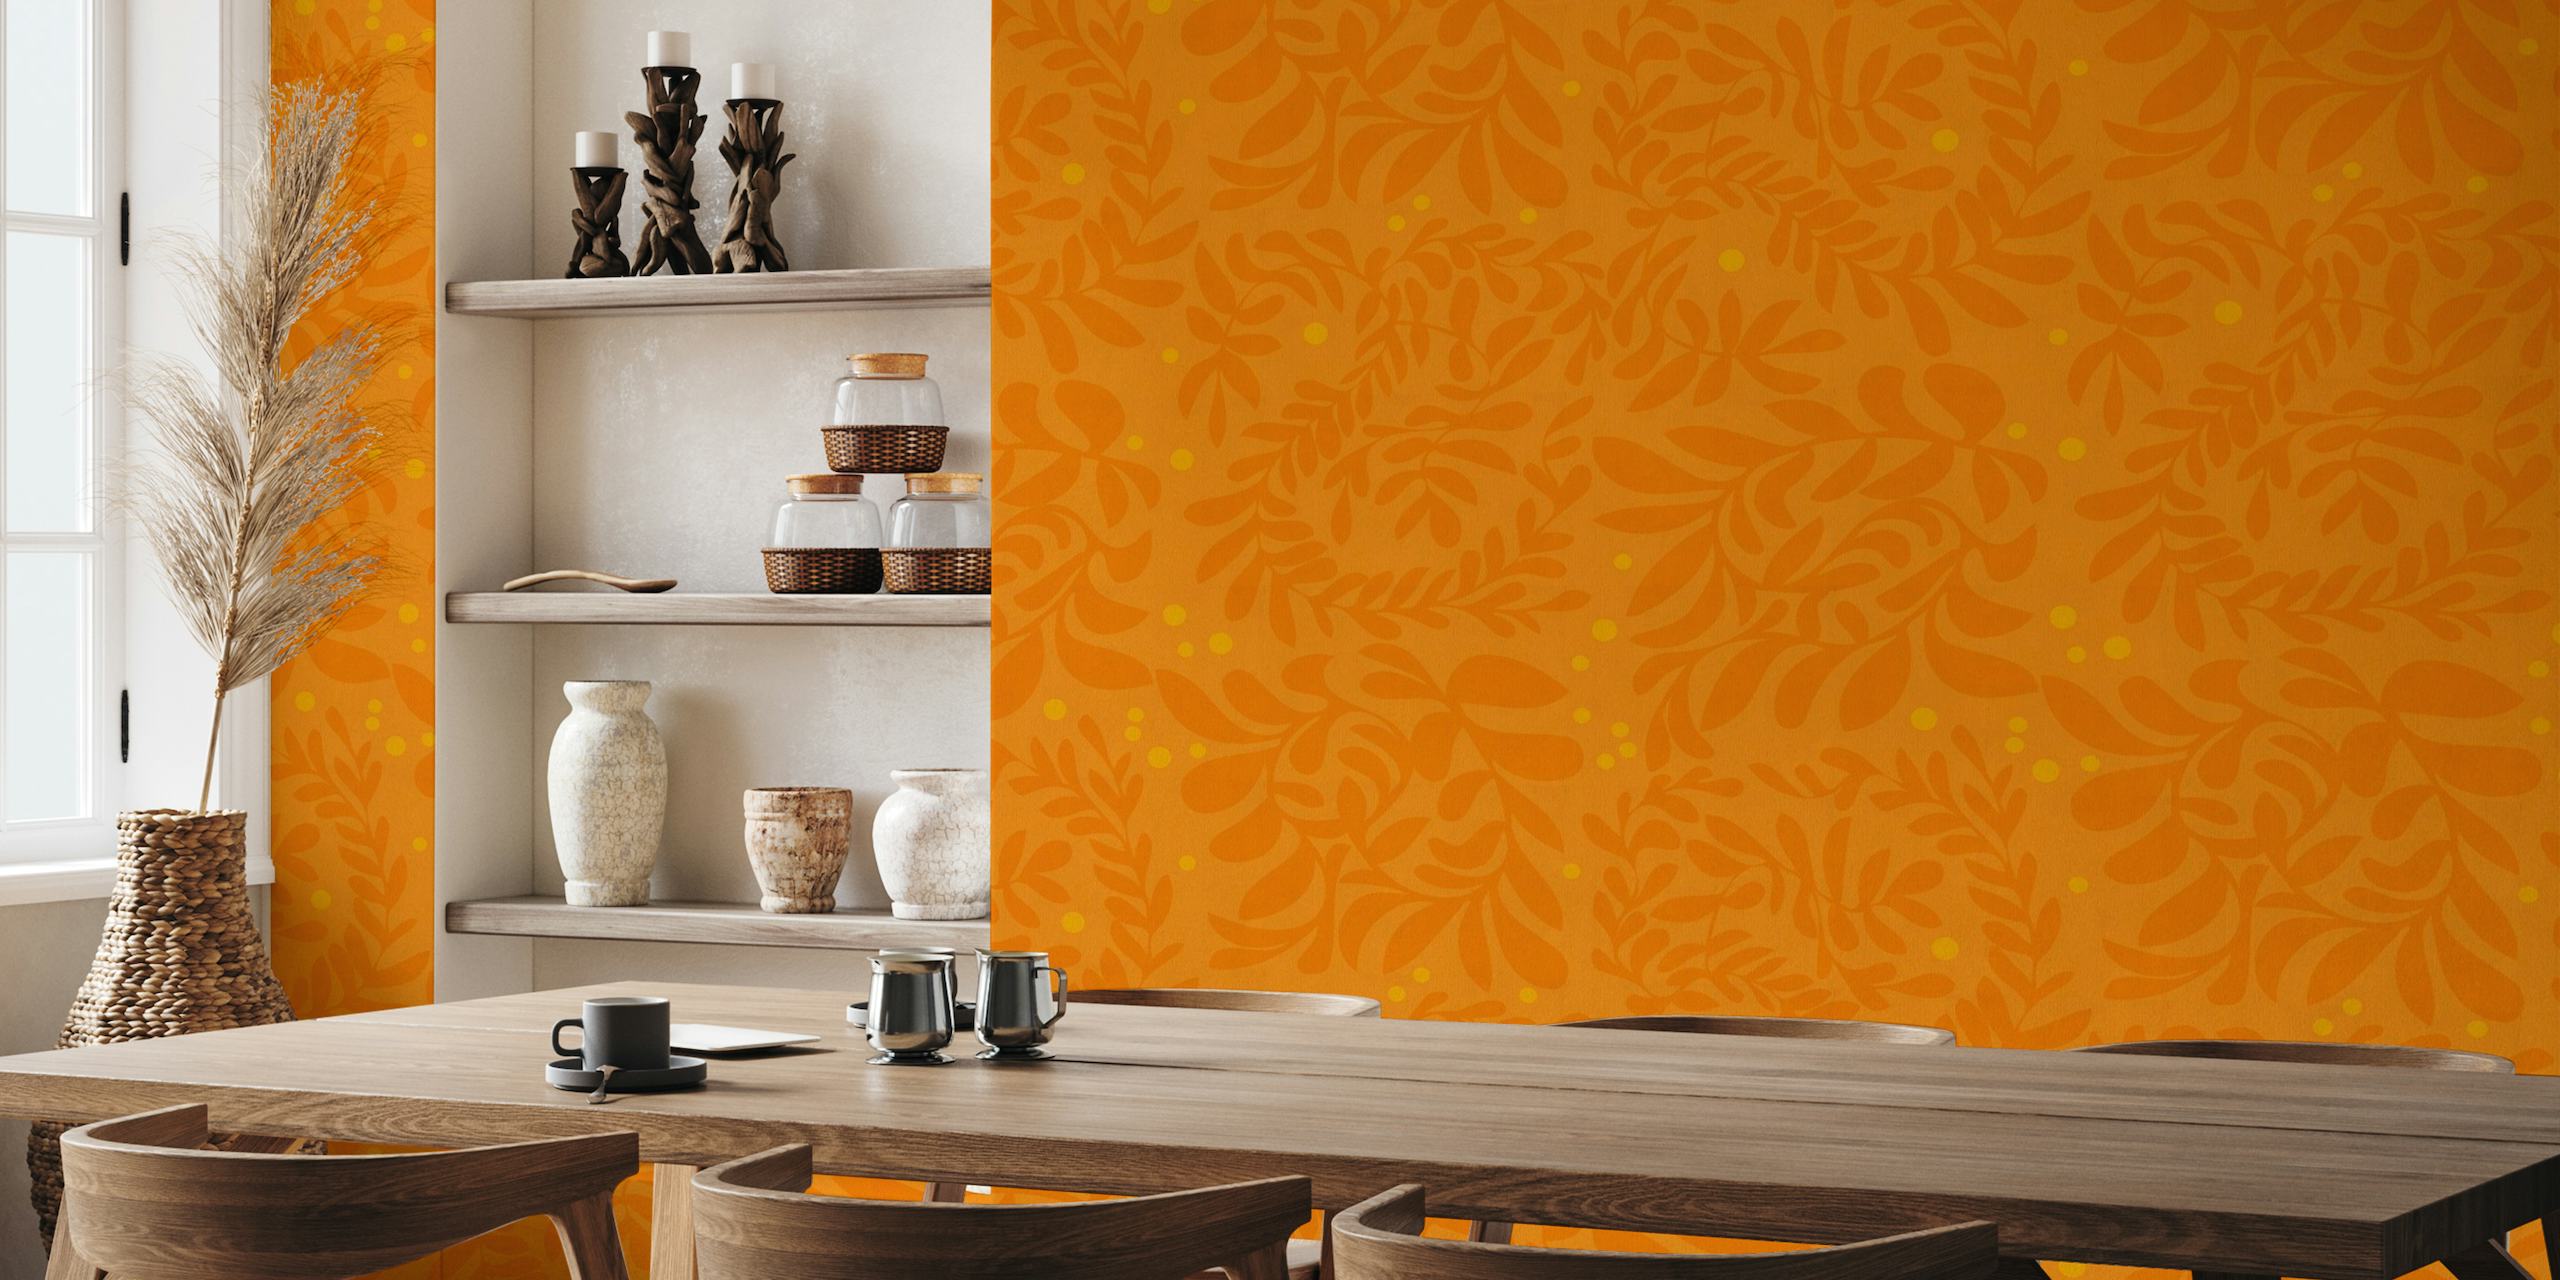 Autumn-inspired wall mural with a leaf pattern on an orange background.